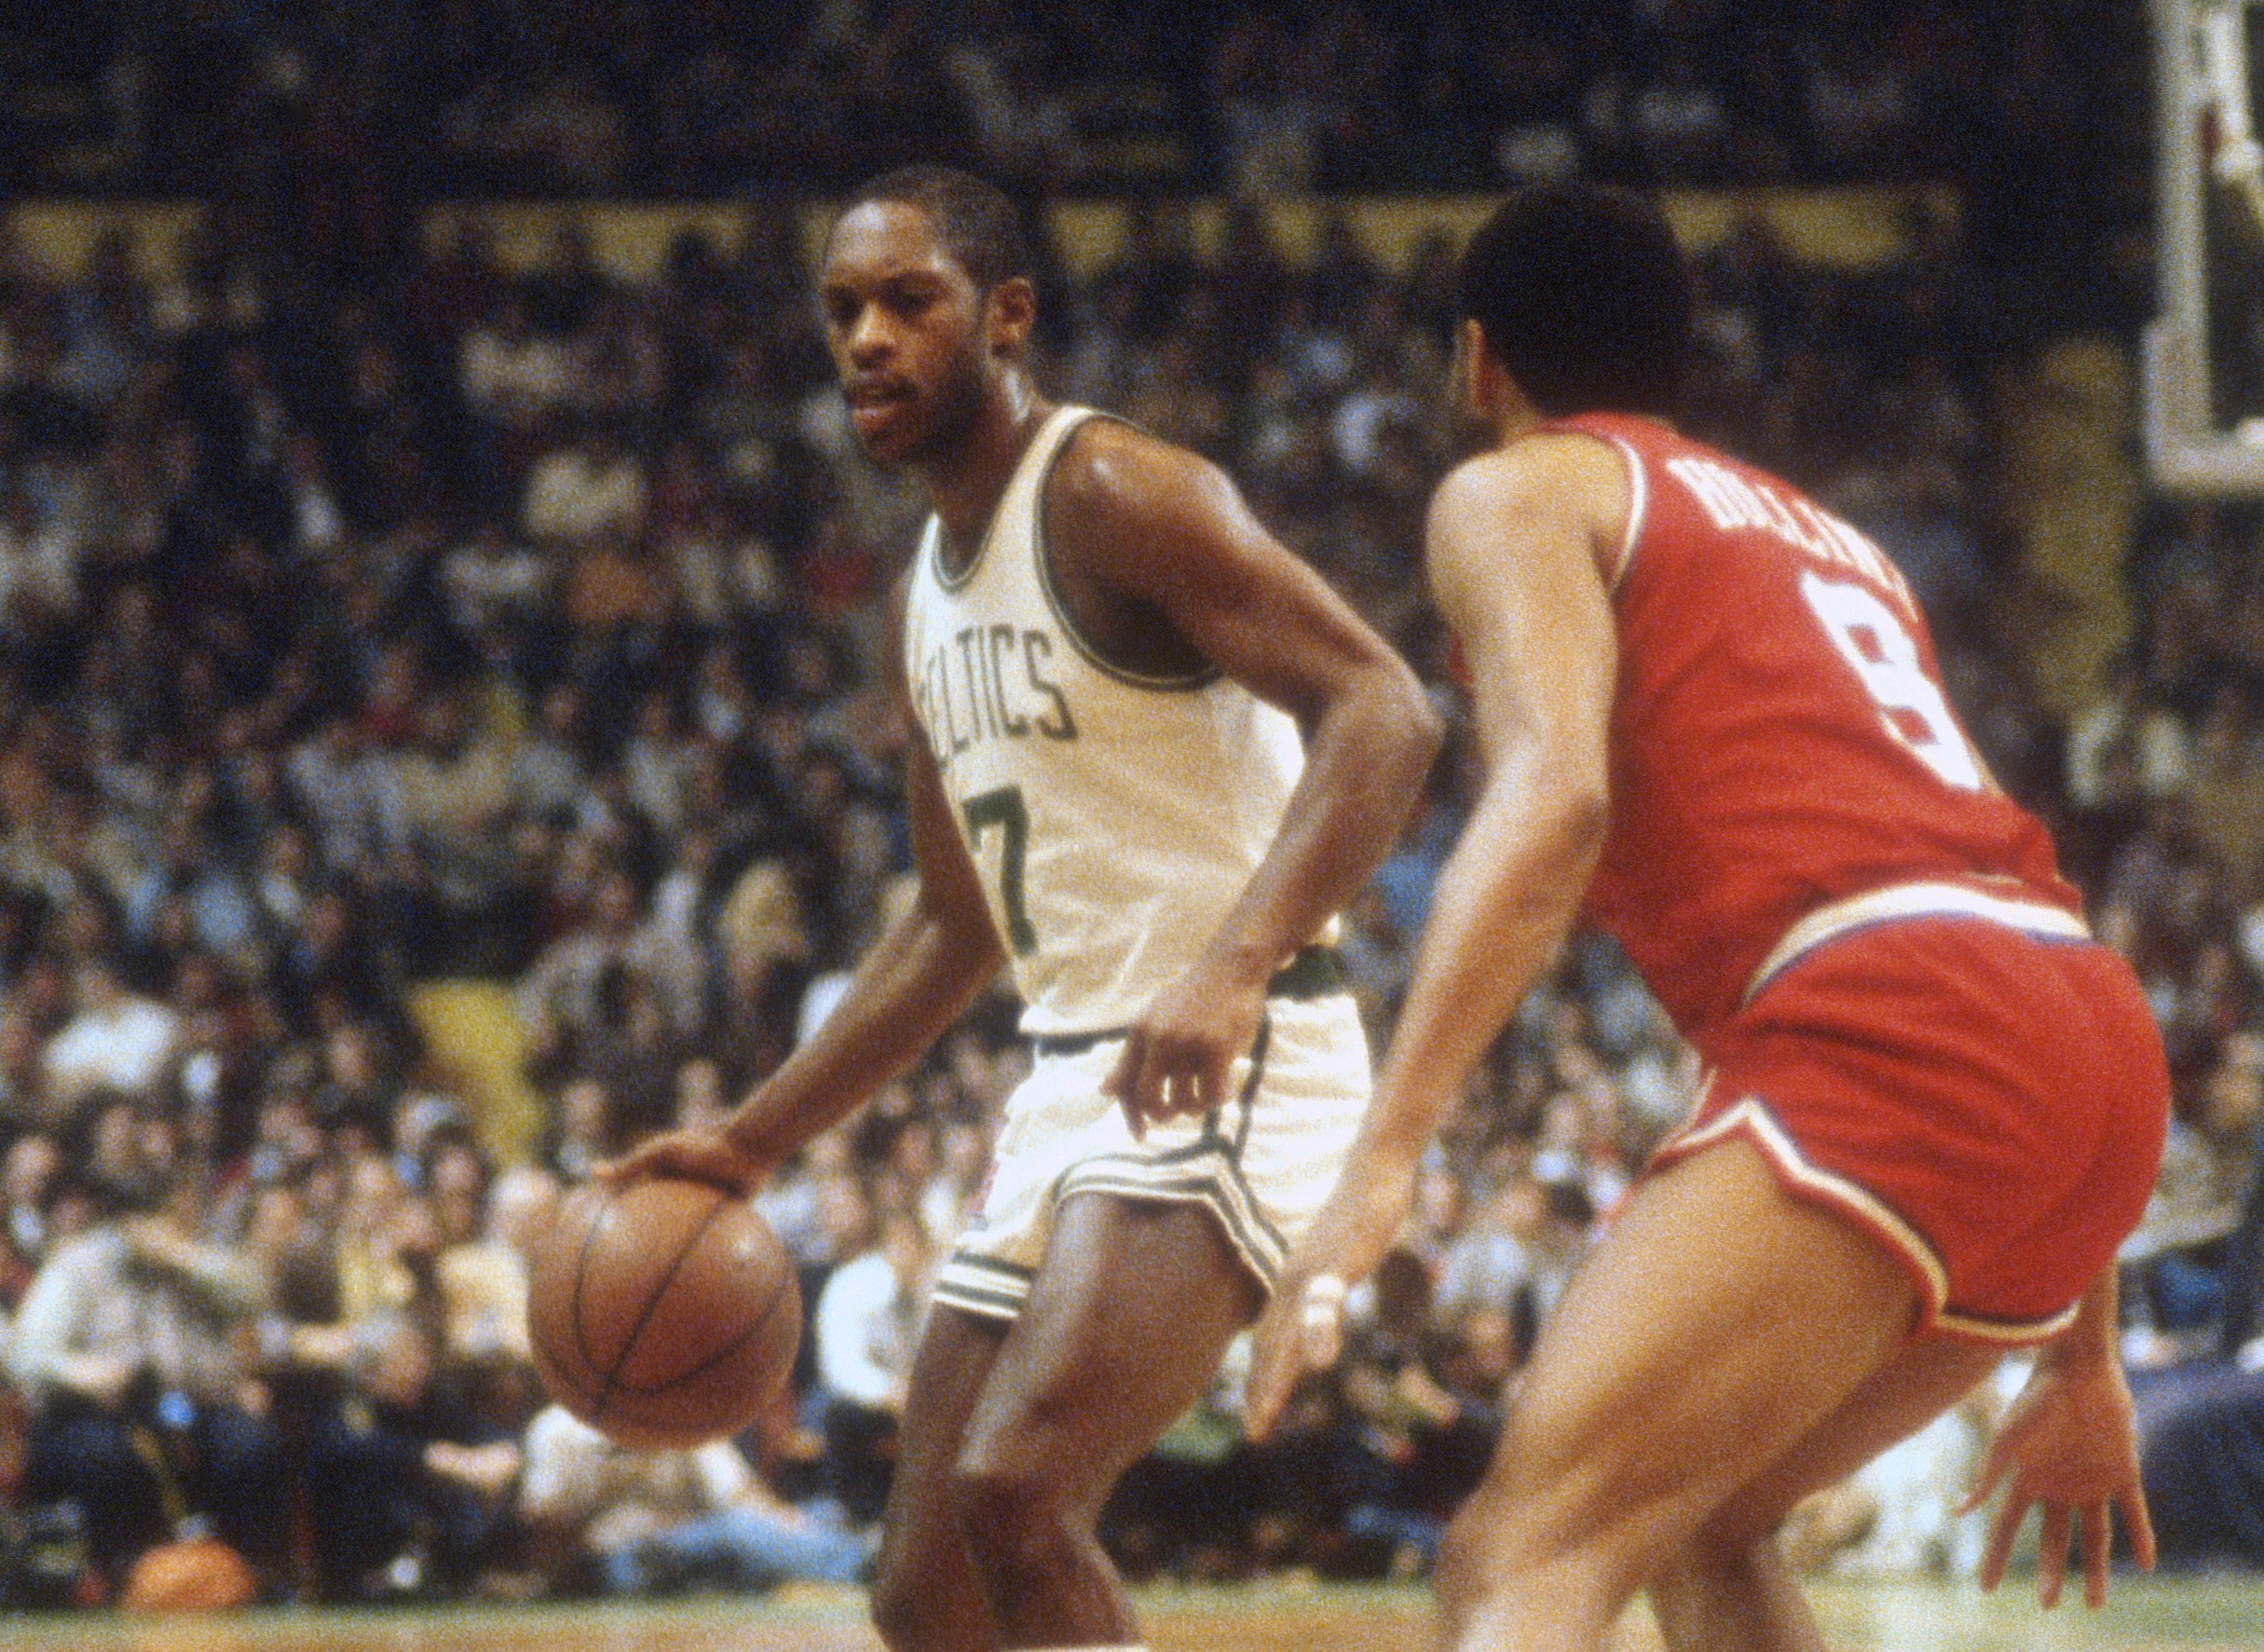 Nate Archibald of the Boston Celtics dribbles the ball while guarded by Lionel Hollins of the Philadelphia 76ers.